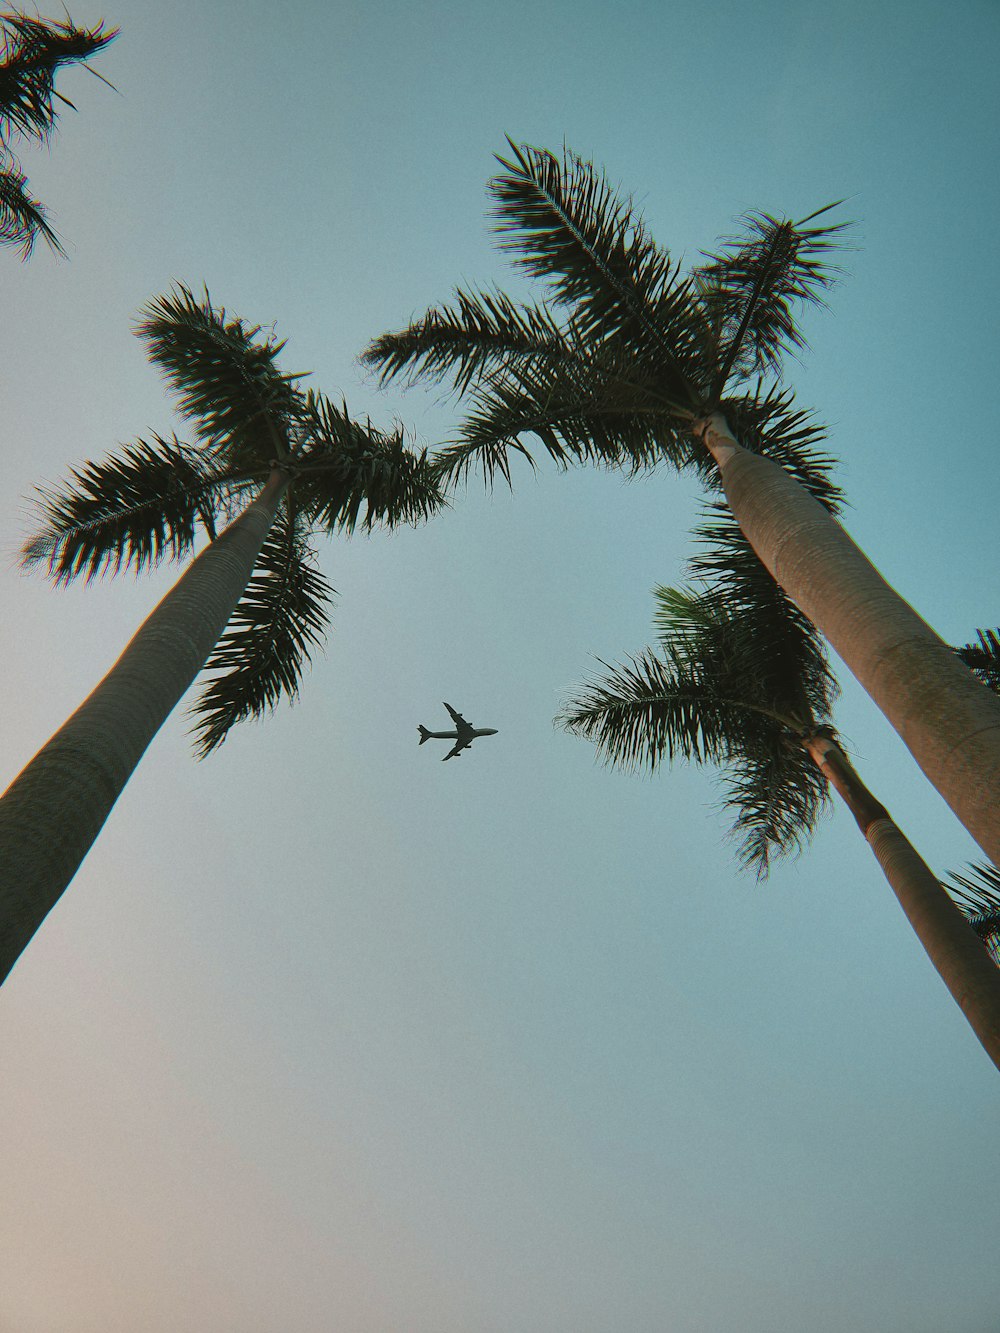 black bird flying over palm tree during daytime